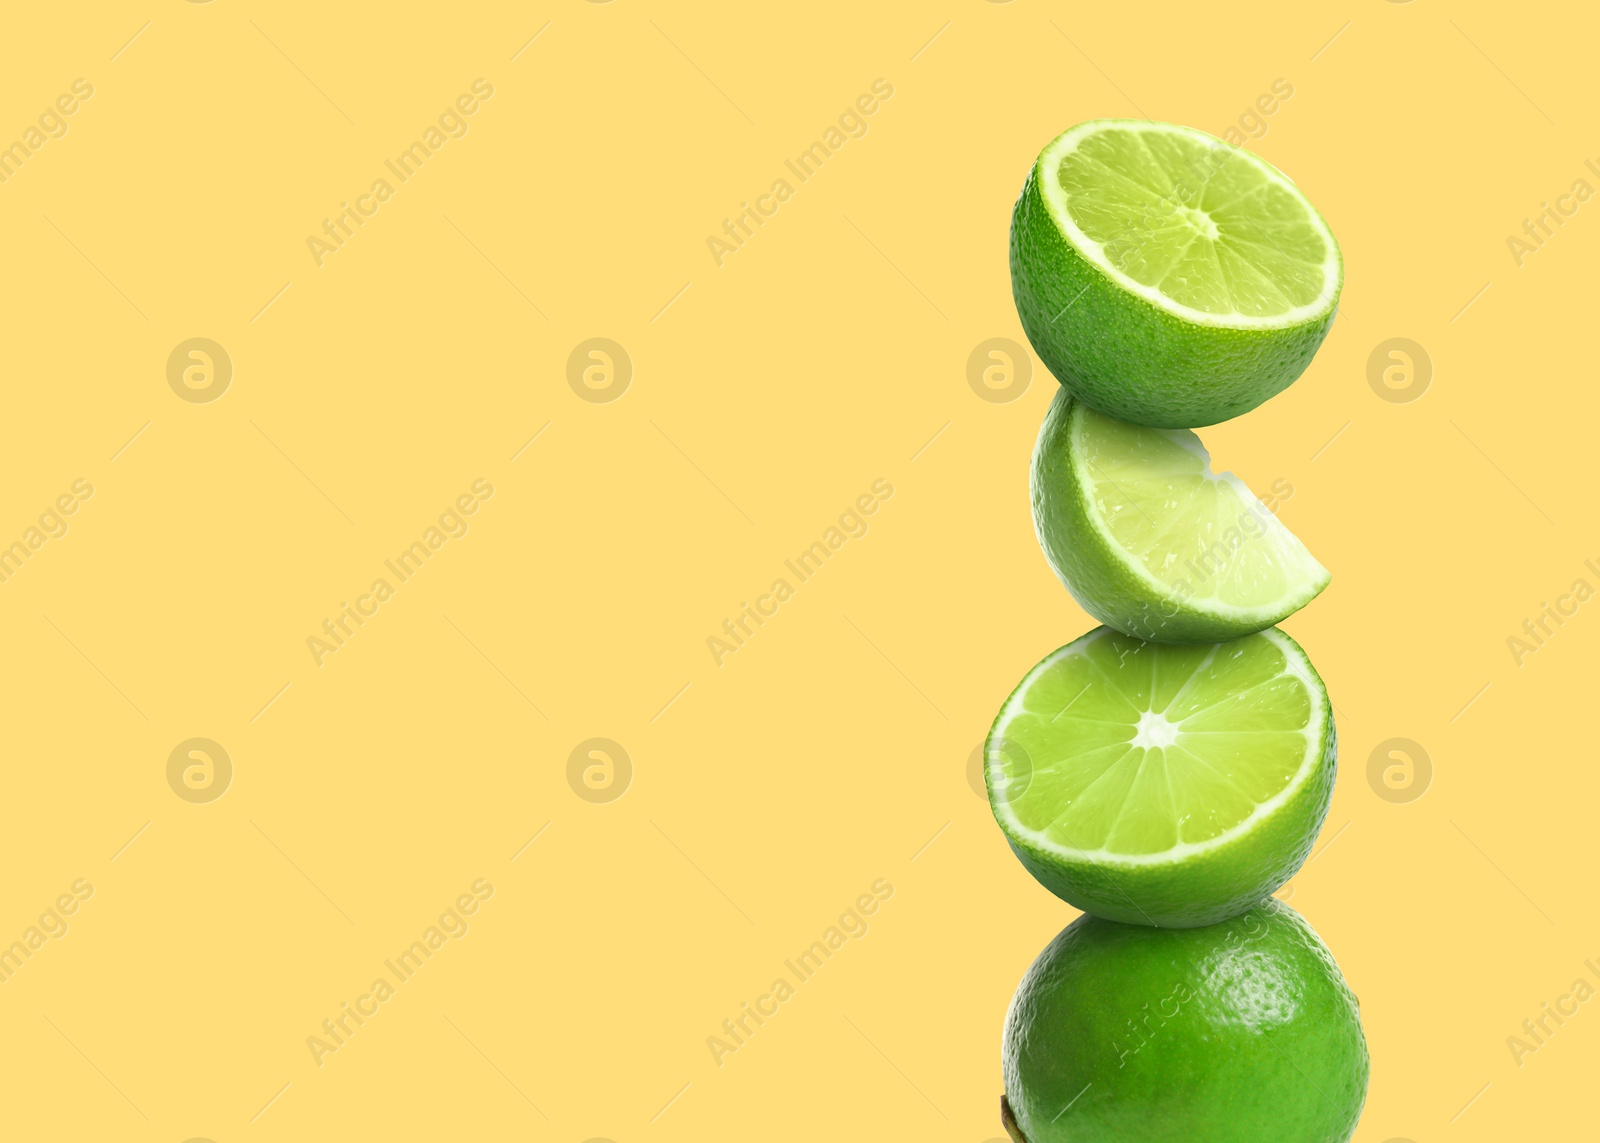 Image of Stacked cut and whole limes on pale yellow background, space for text